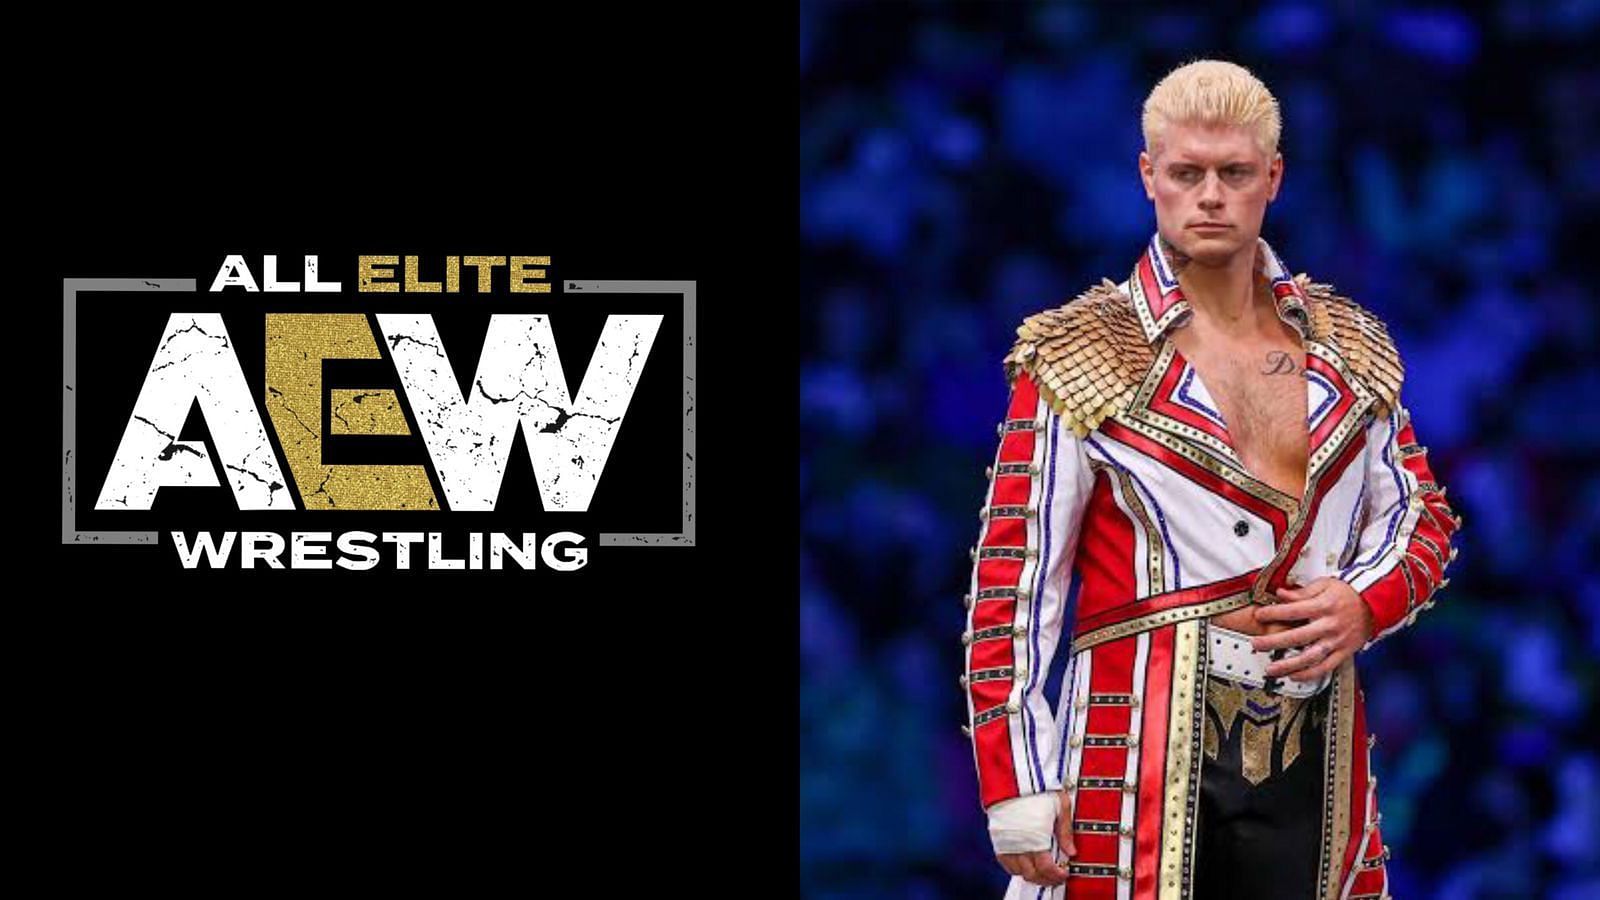 AEW name present at WWE star Cody Rhodes